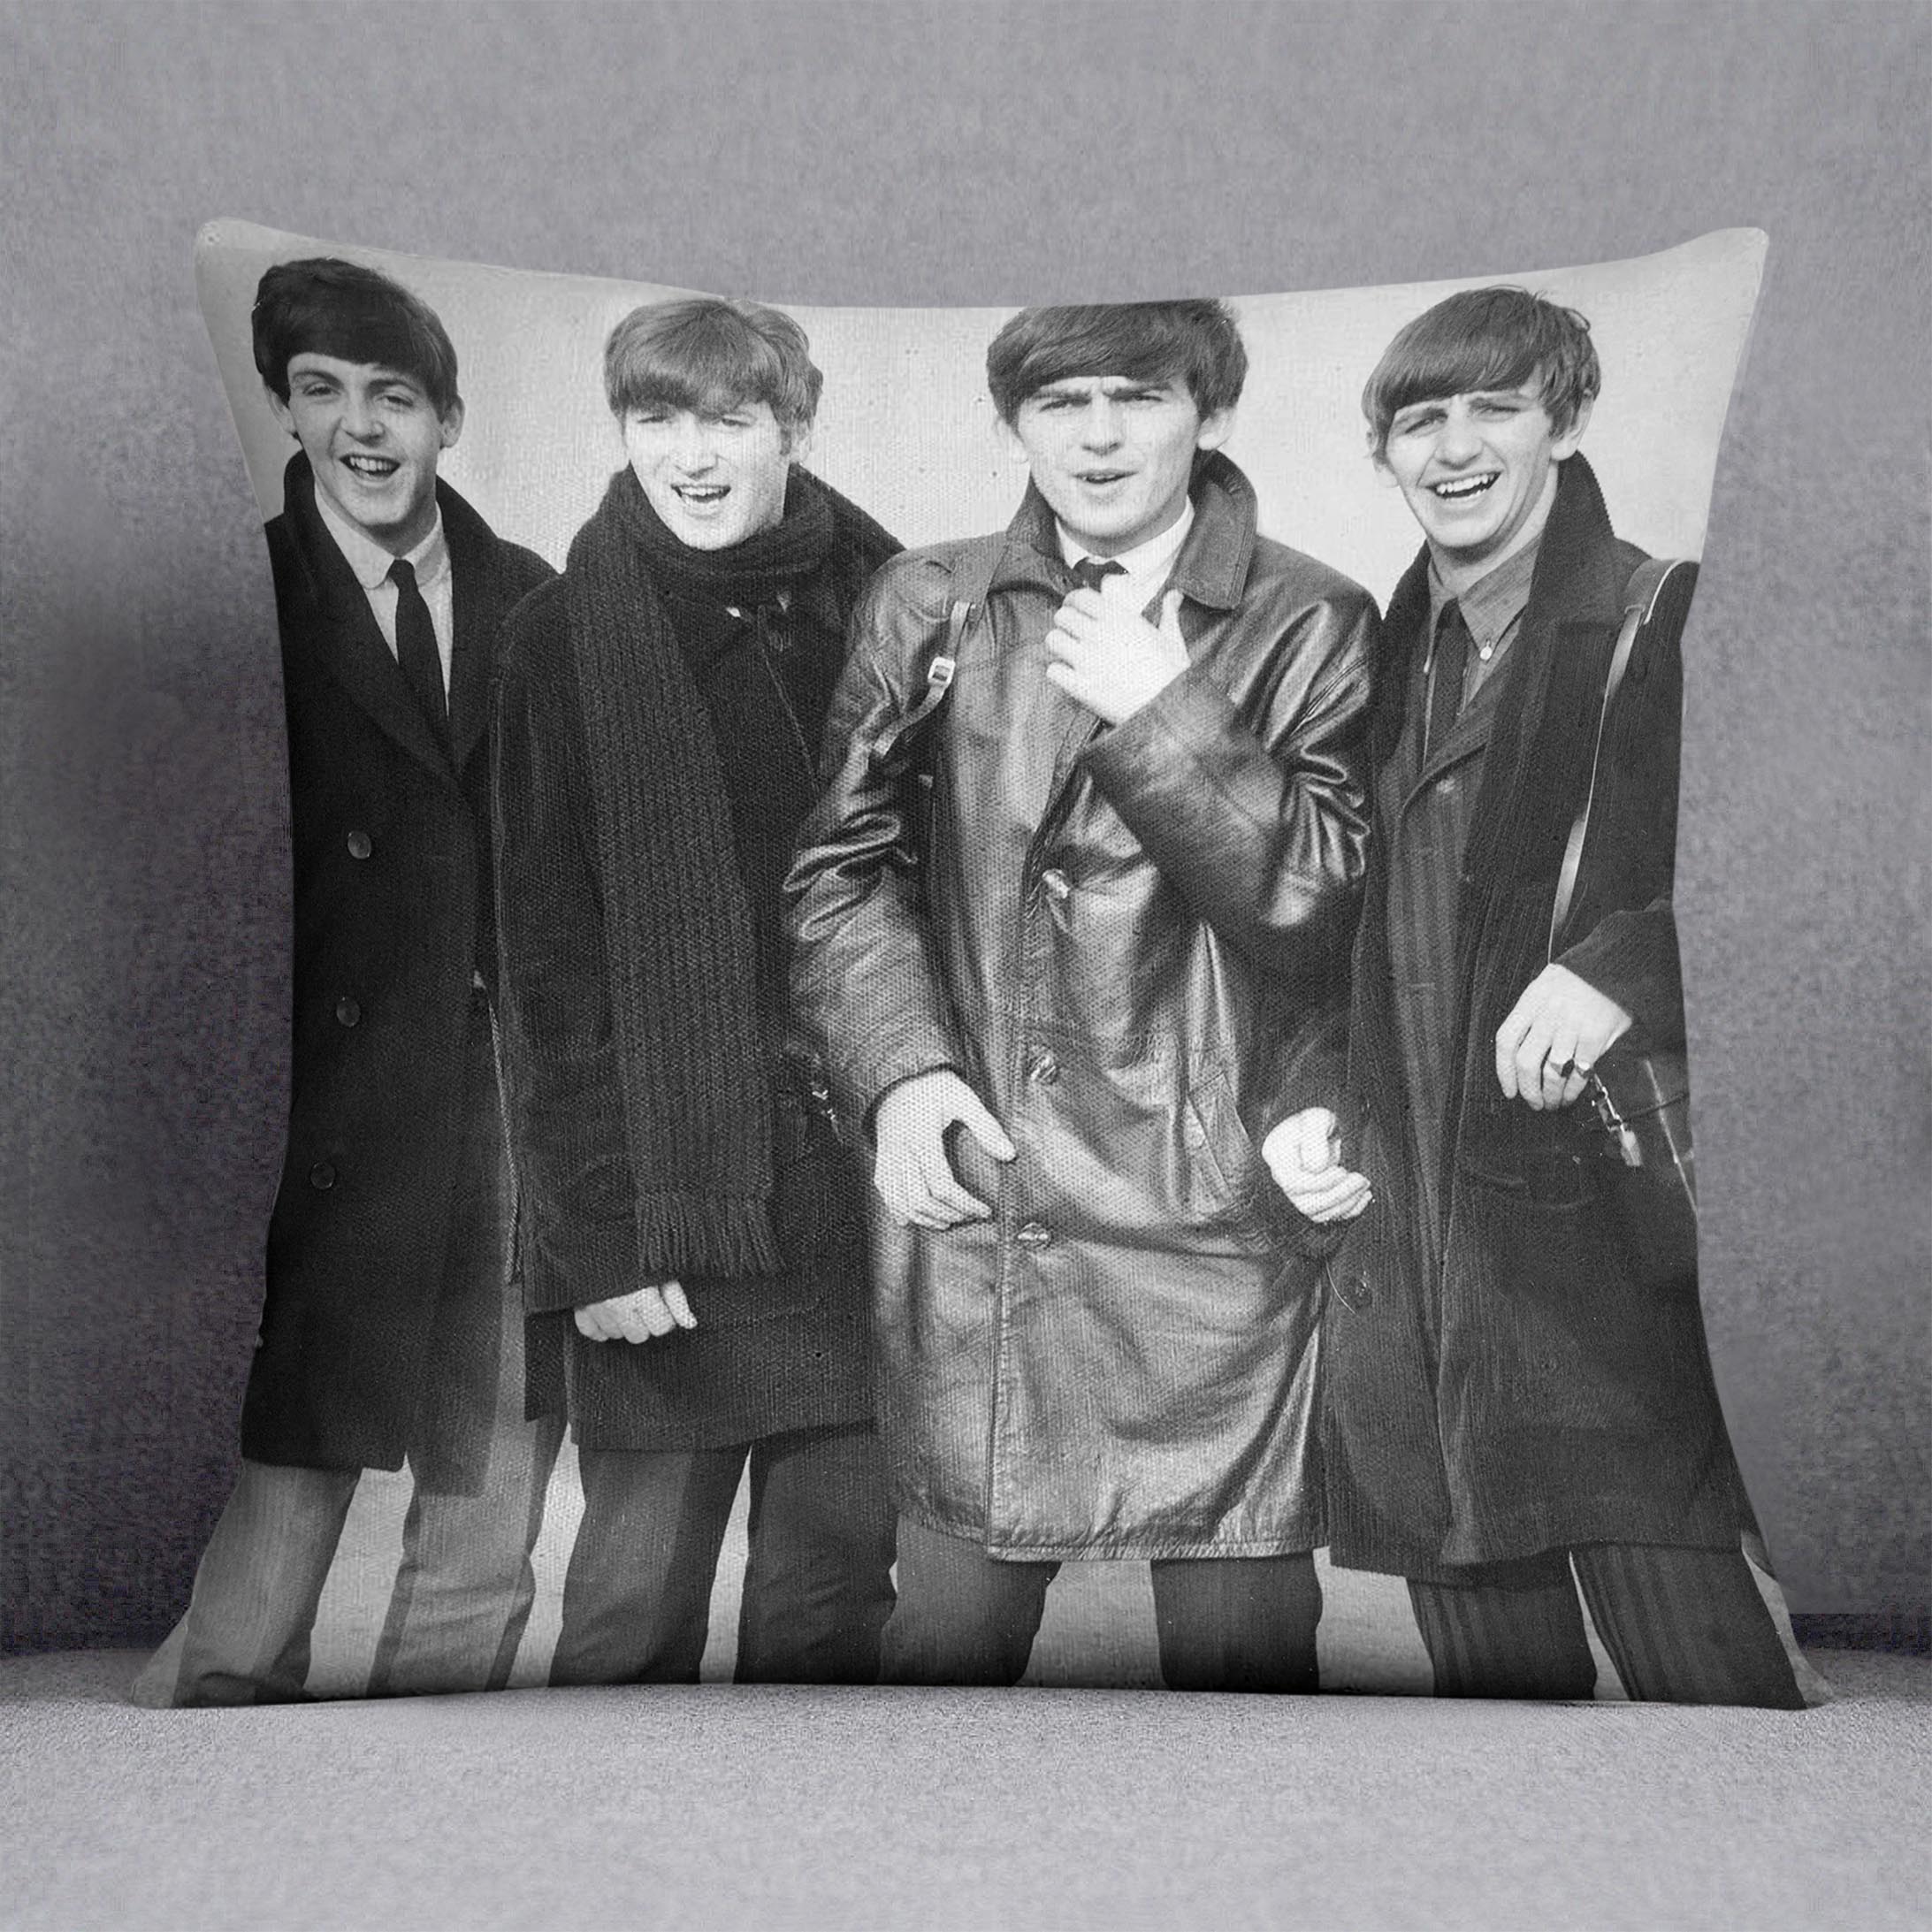 The Beatles in overcoats in 1963 Cushion